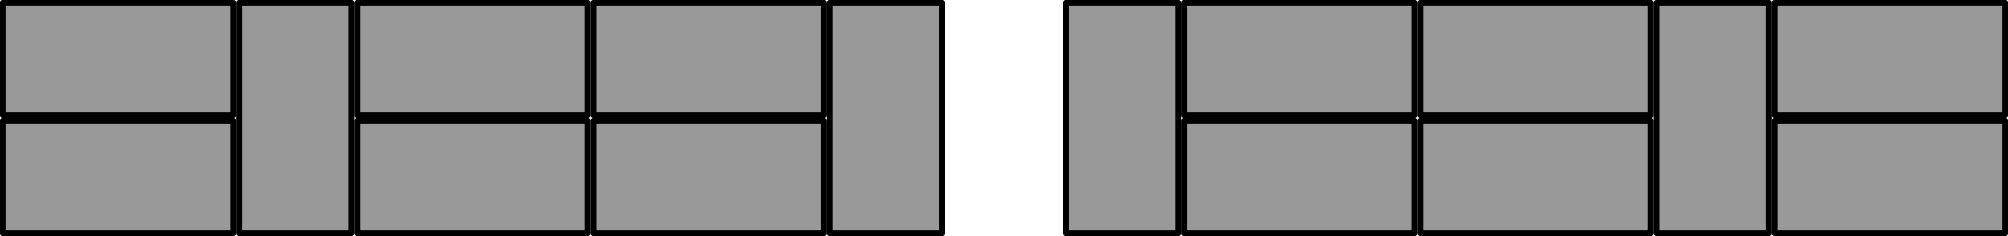 One arrangement has two horizontal rectangles, then a vertical rectangle, then two pairs of horizontal rectangles, then a vertical rectangle. The other arrangement has a vertical rectangle, then two pairs of horizontal rectangles, then a vertical rectangle, then a pair of horizontal rectangles.